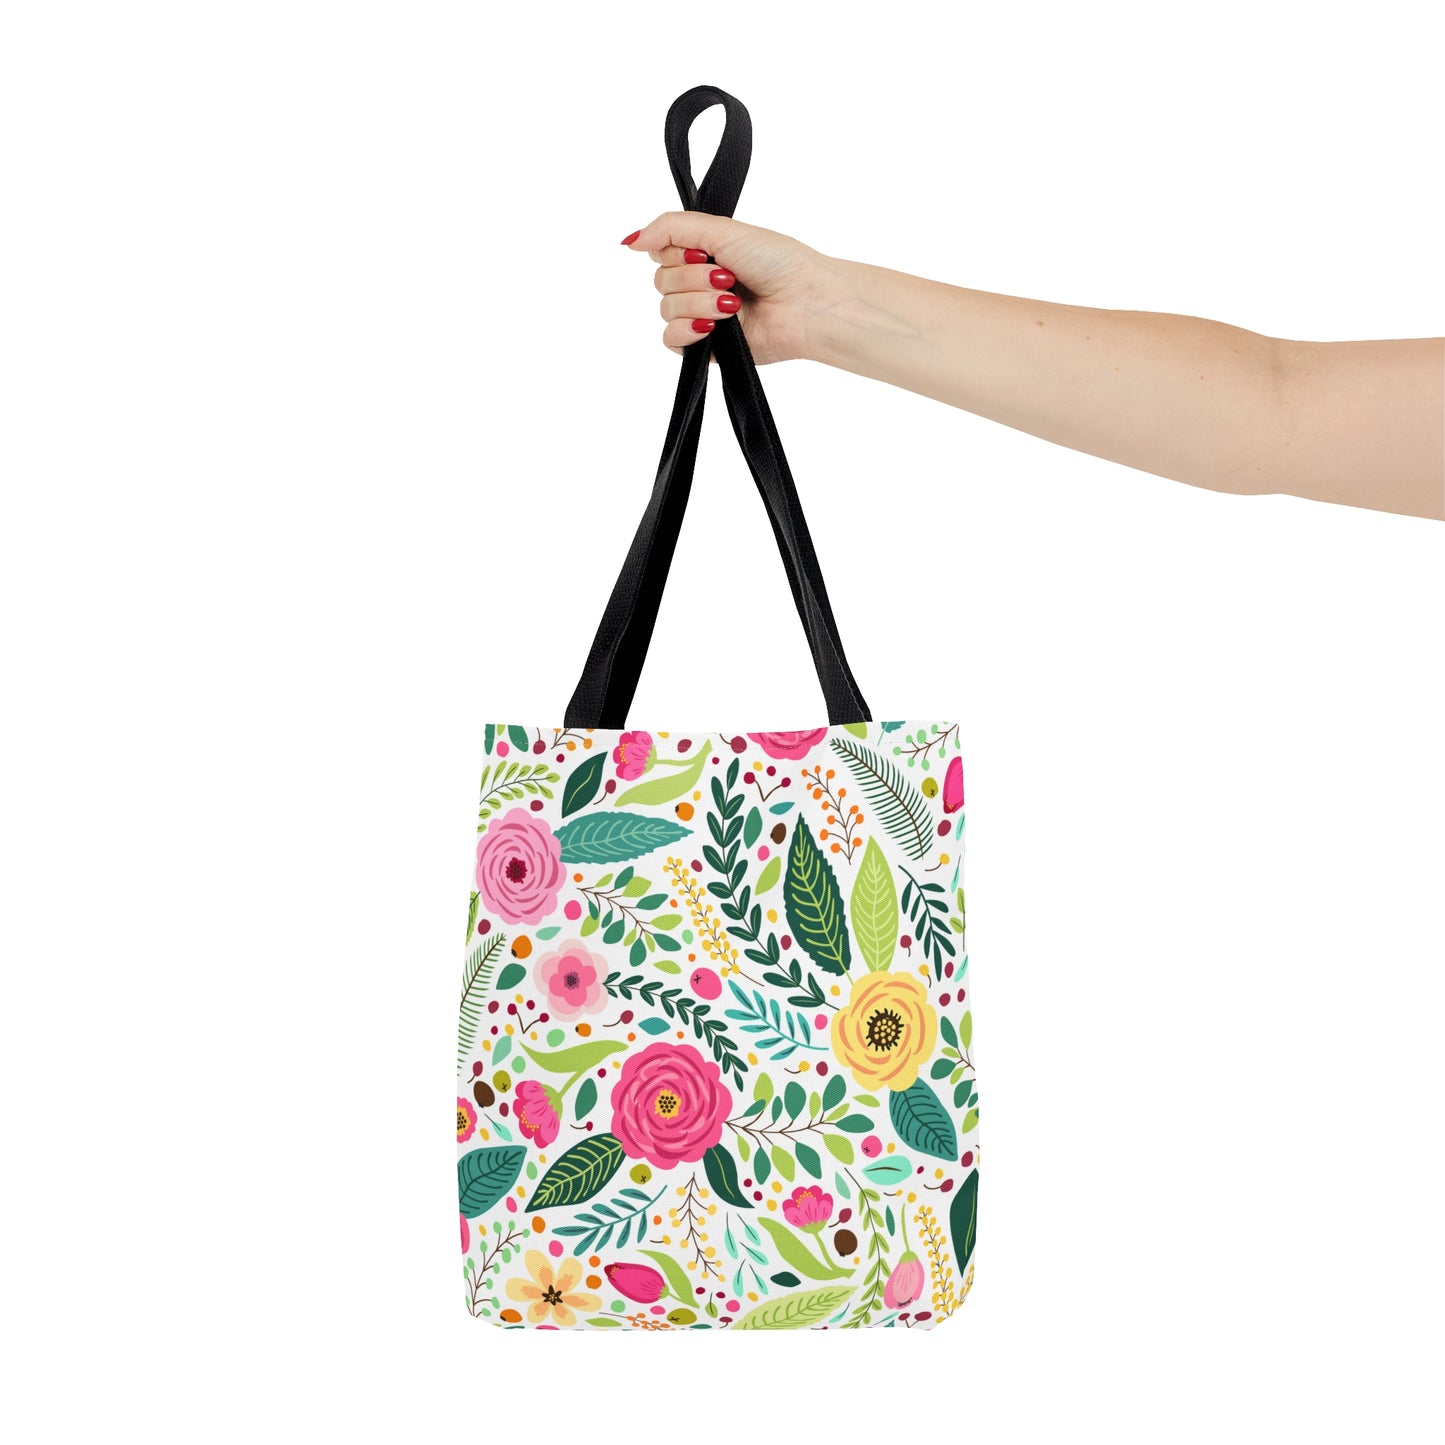 Bright Floral Tote Bag with Black Strap